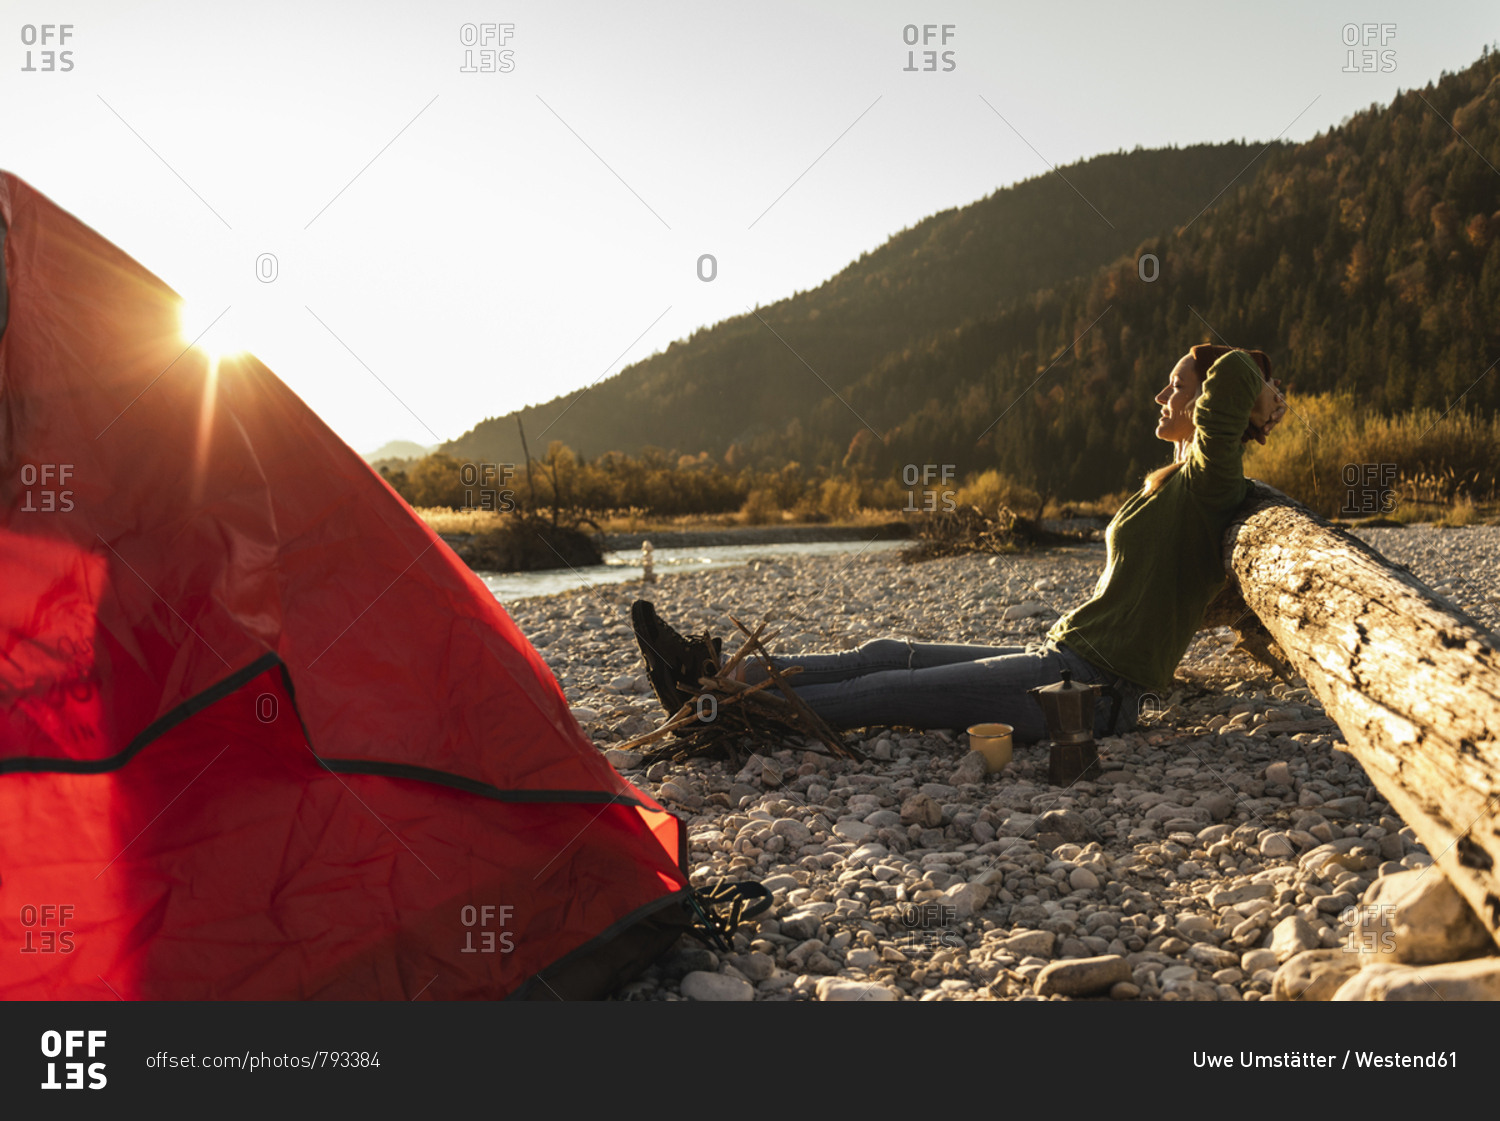 Mature woman camping at riverside in the evening light